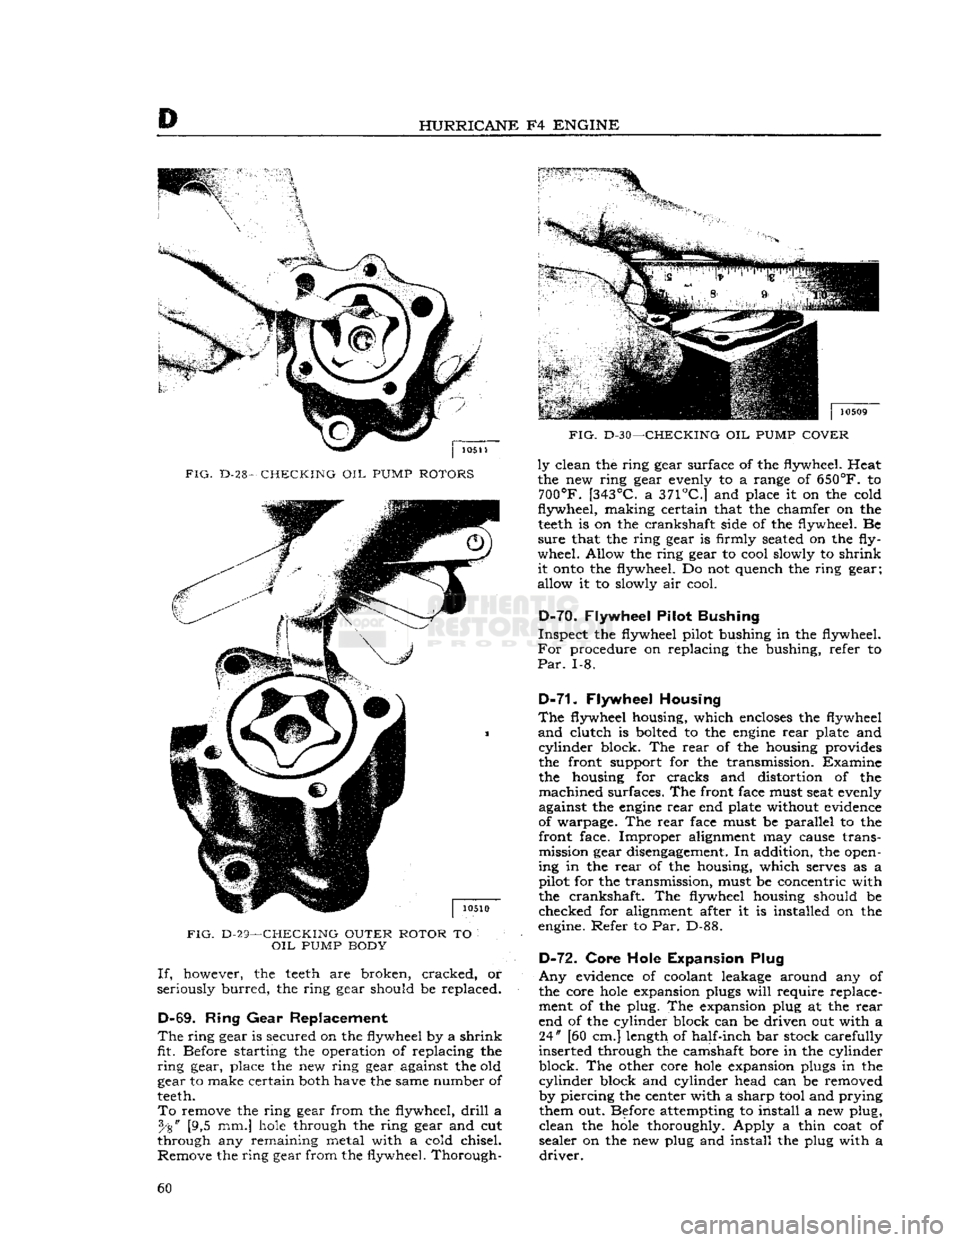 JEEP CJ 1953 Workshop Manual 
HURRICANE
 F4
 ENGINE 

FIG.
 D-28-
 CHECKING
 OIL
 PUMP
 ROTORS 

FIG.
 D-29—CHECKING OUTER ROTOR
 TO 
 OIL
 PUMP
 BODY If,
 however, the
 teeth
 are broken, cracked, or 
seriously
 burred,
 the r